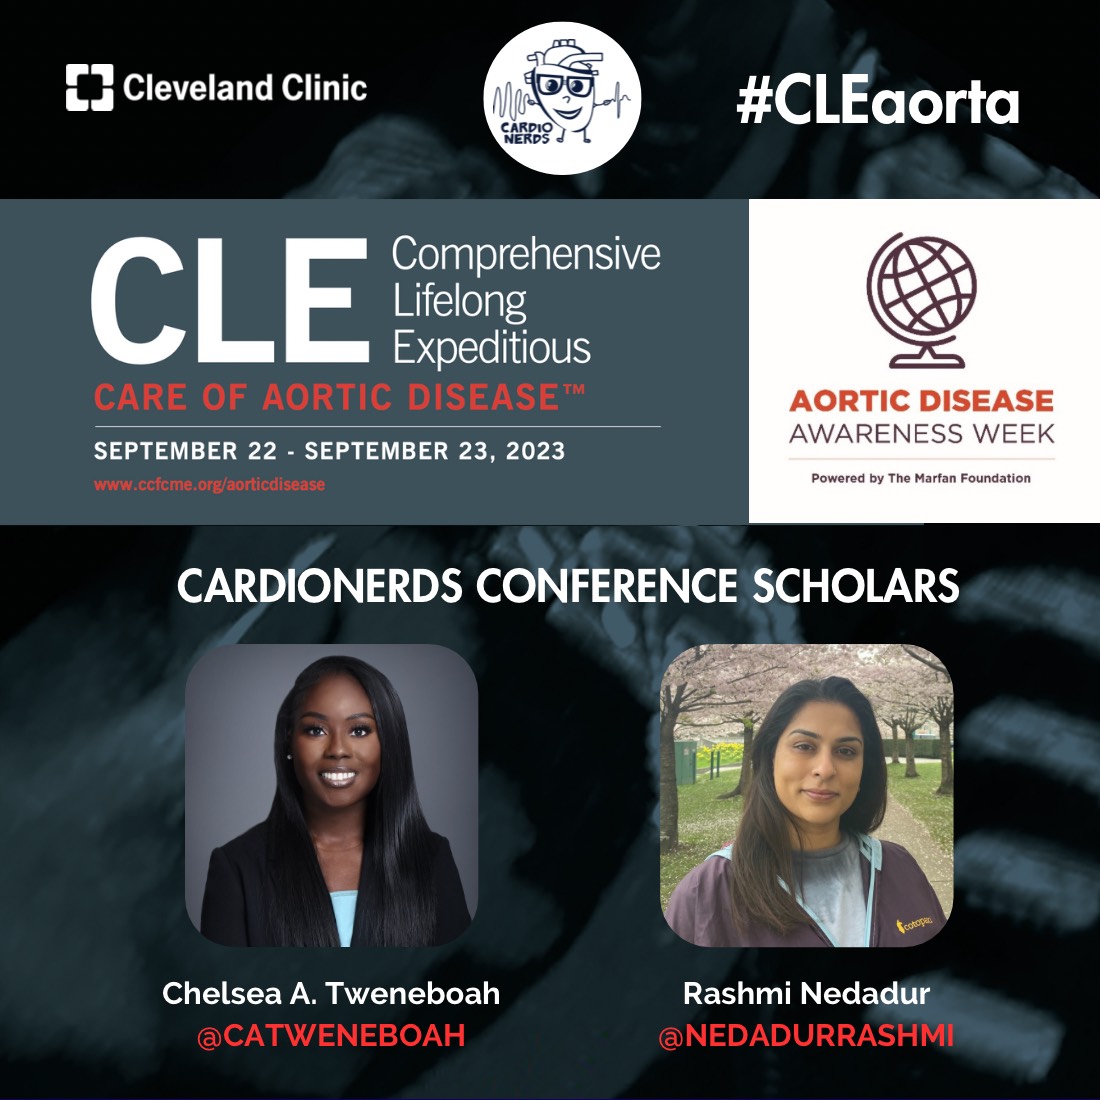 The CardioNerds Preview the CLE Care of Aortic Disease Symposium